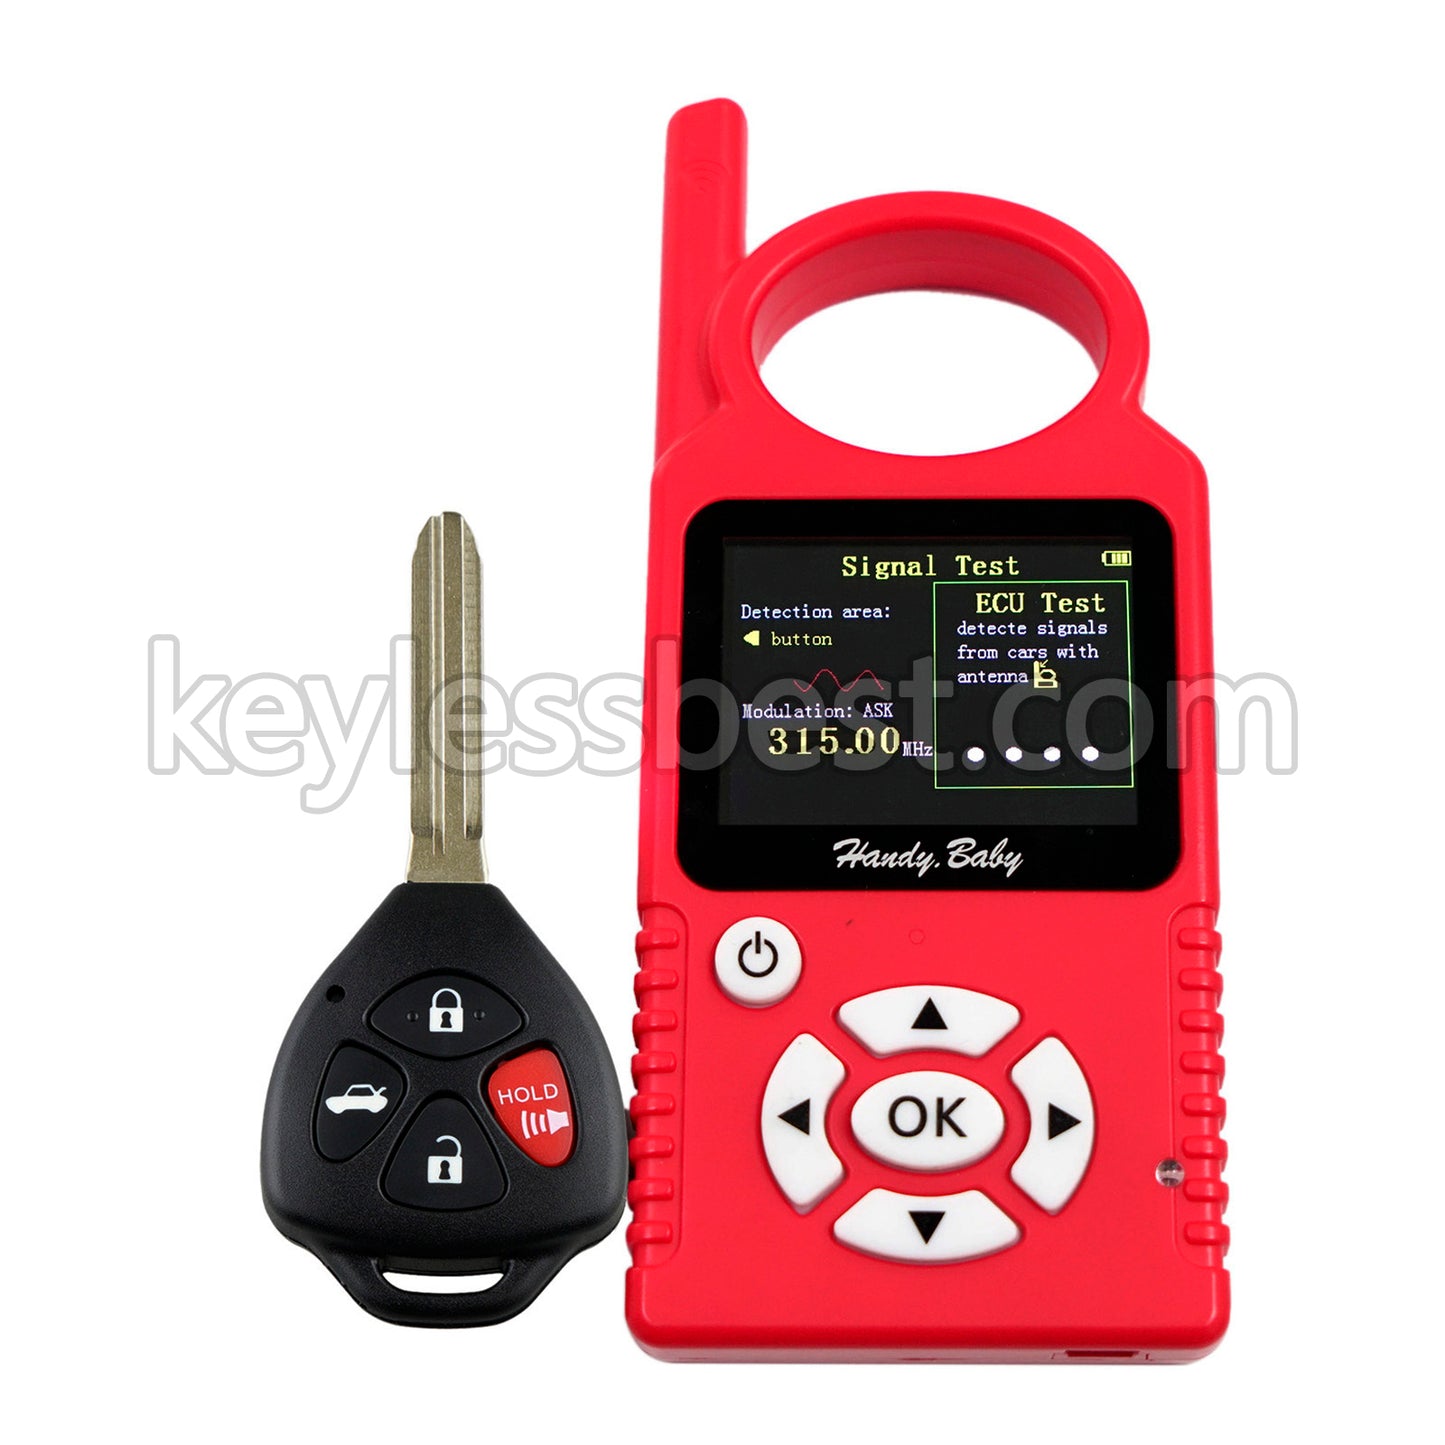 2010 - 2011 Toyota Camry / 4 Buttons Remote Key / MOZB41TG / 314MHz